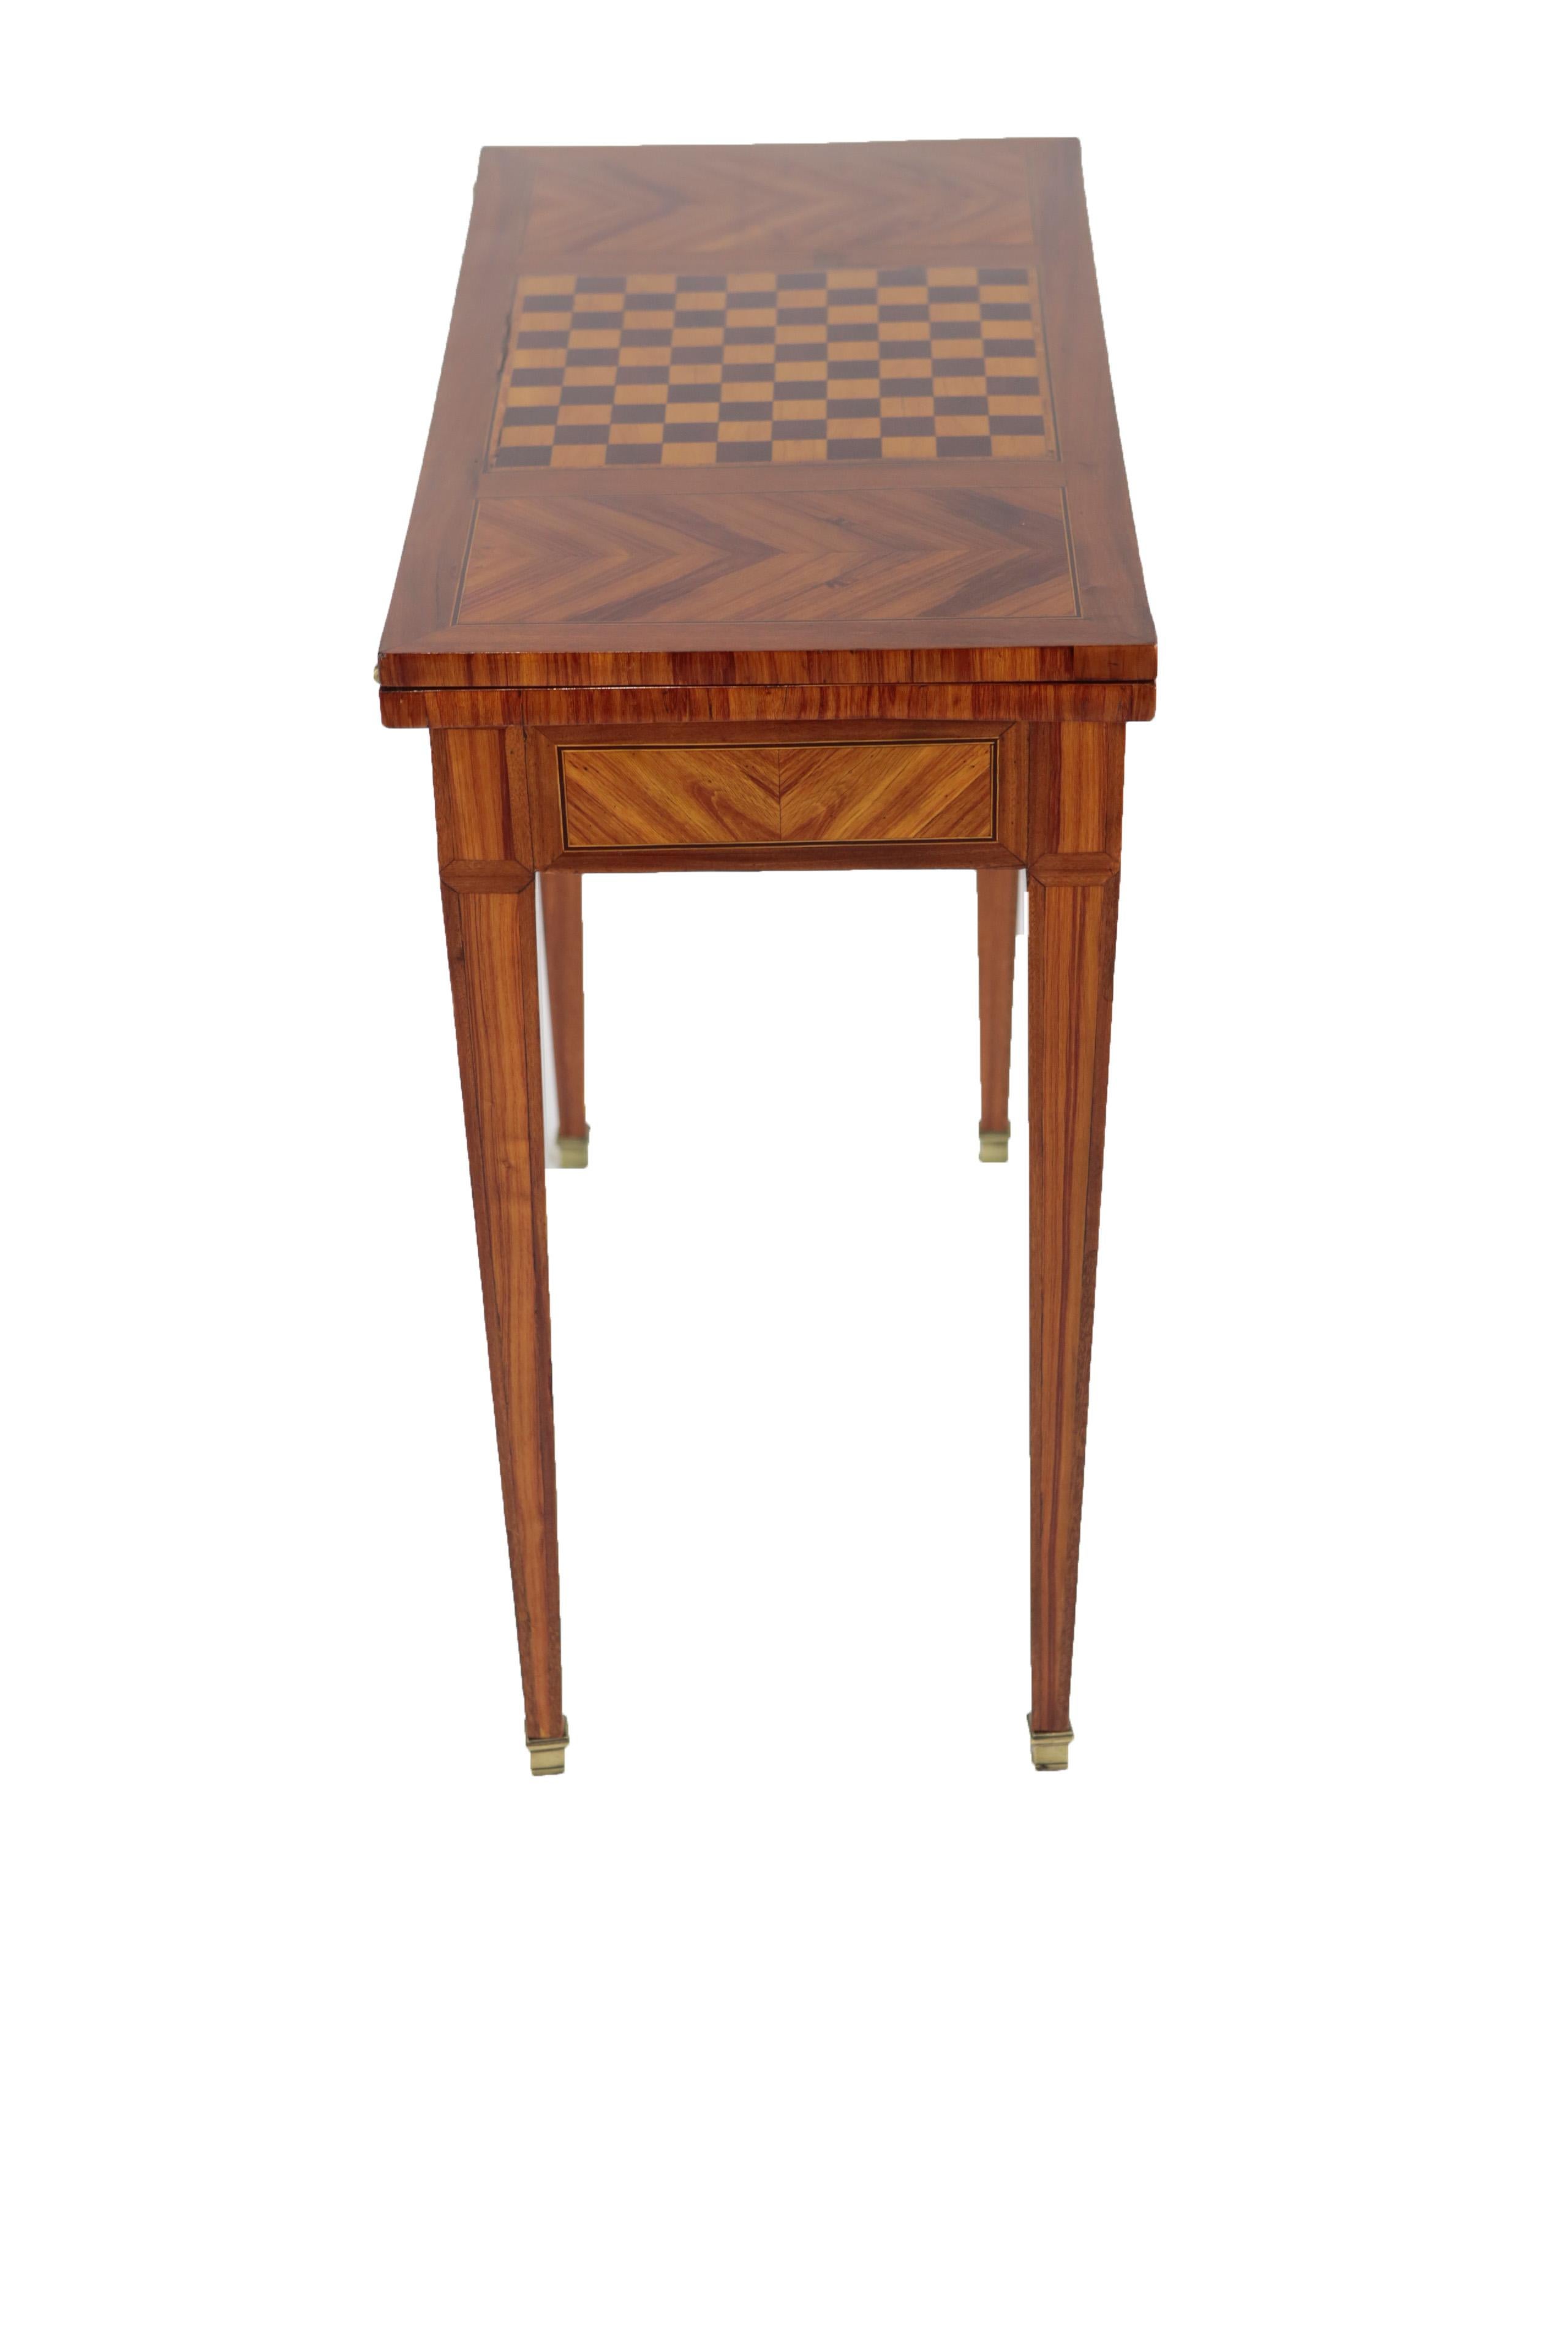 Foldable Game Table, France, Rosewood, circa 1850-1860 3